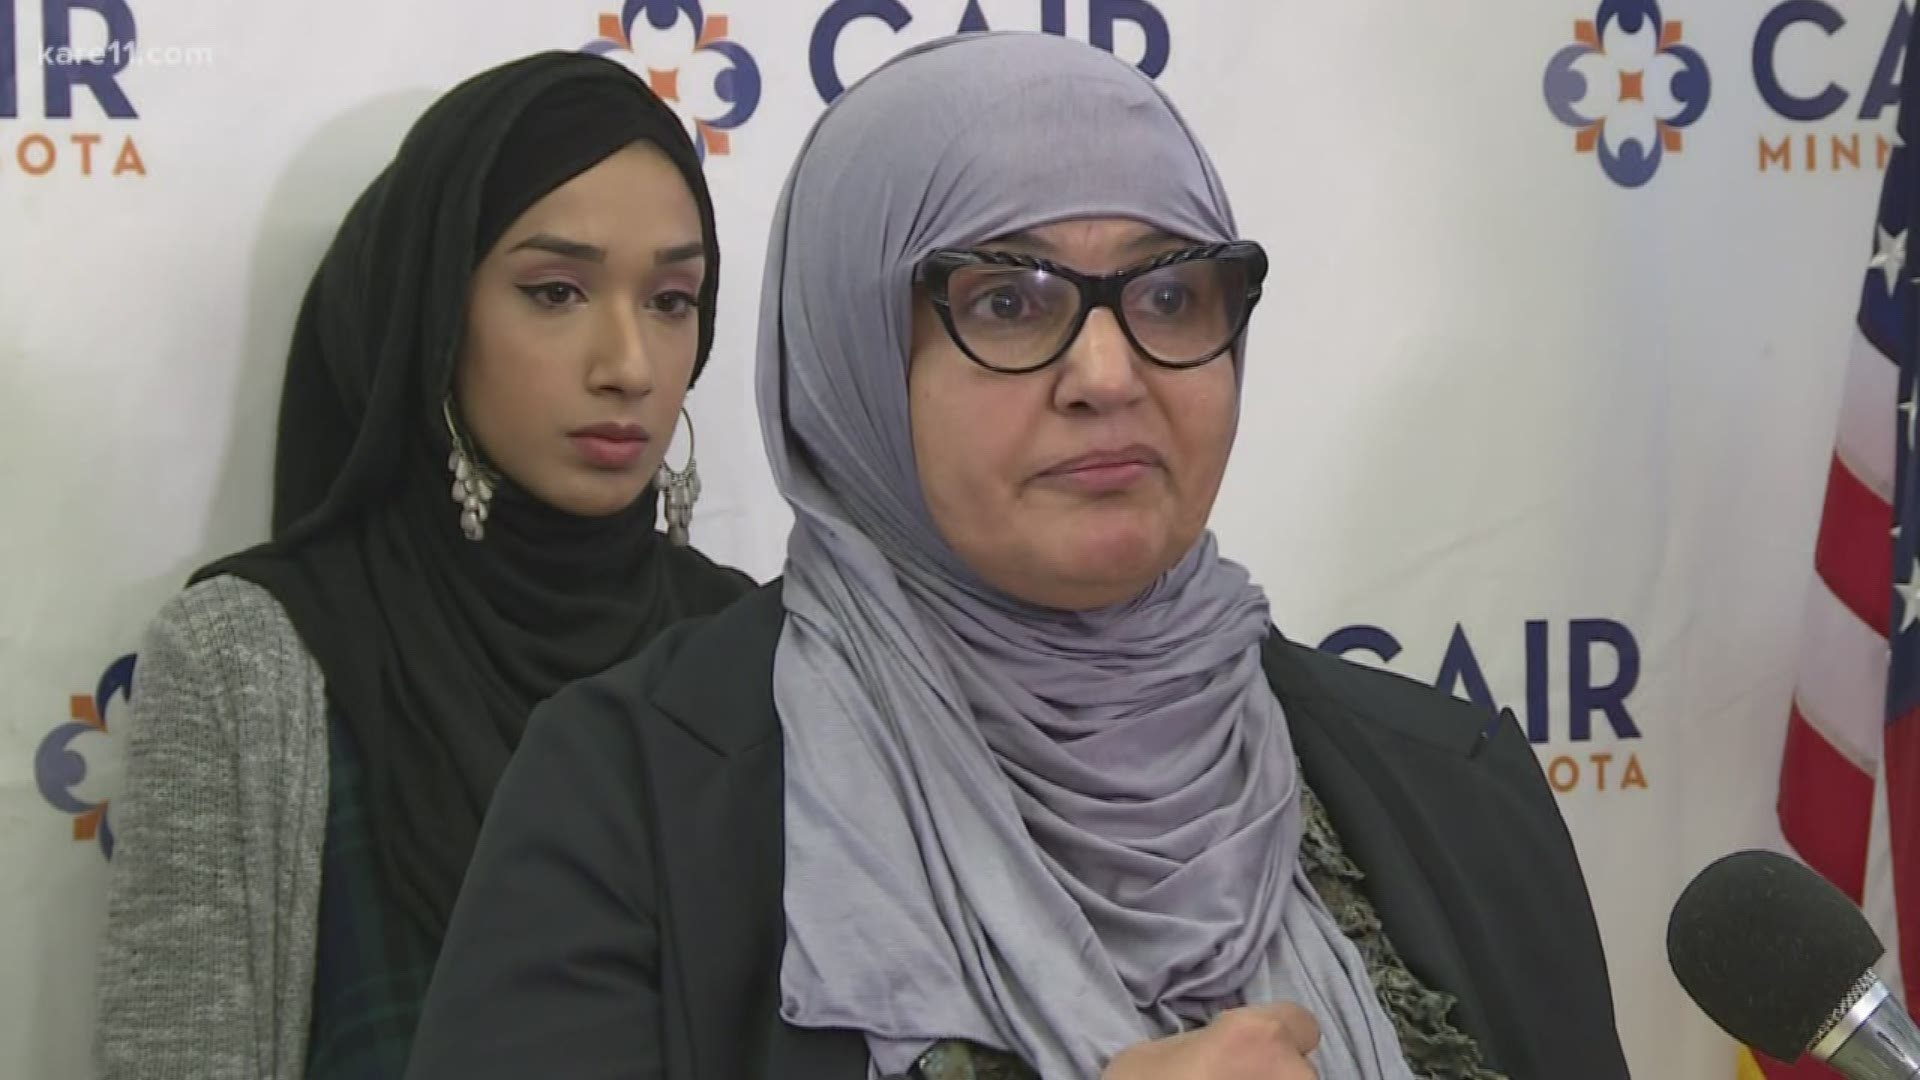 Aida Shyef Al-Kadi, 57, said her treatment at the Ramsey County jail in August 2013 was “one of the most humiliating and harmful experiences"of her life.